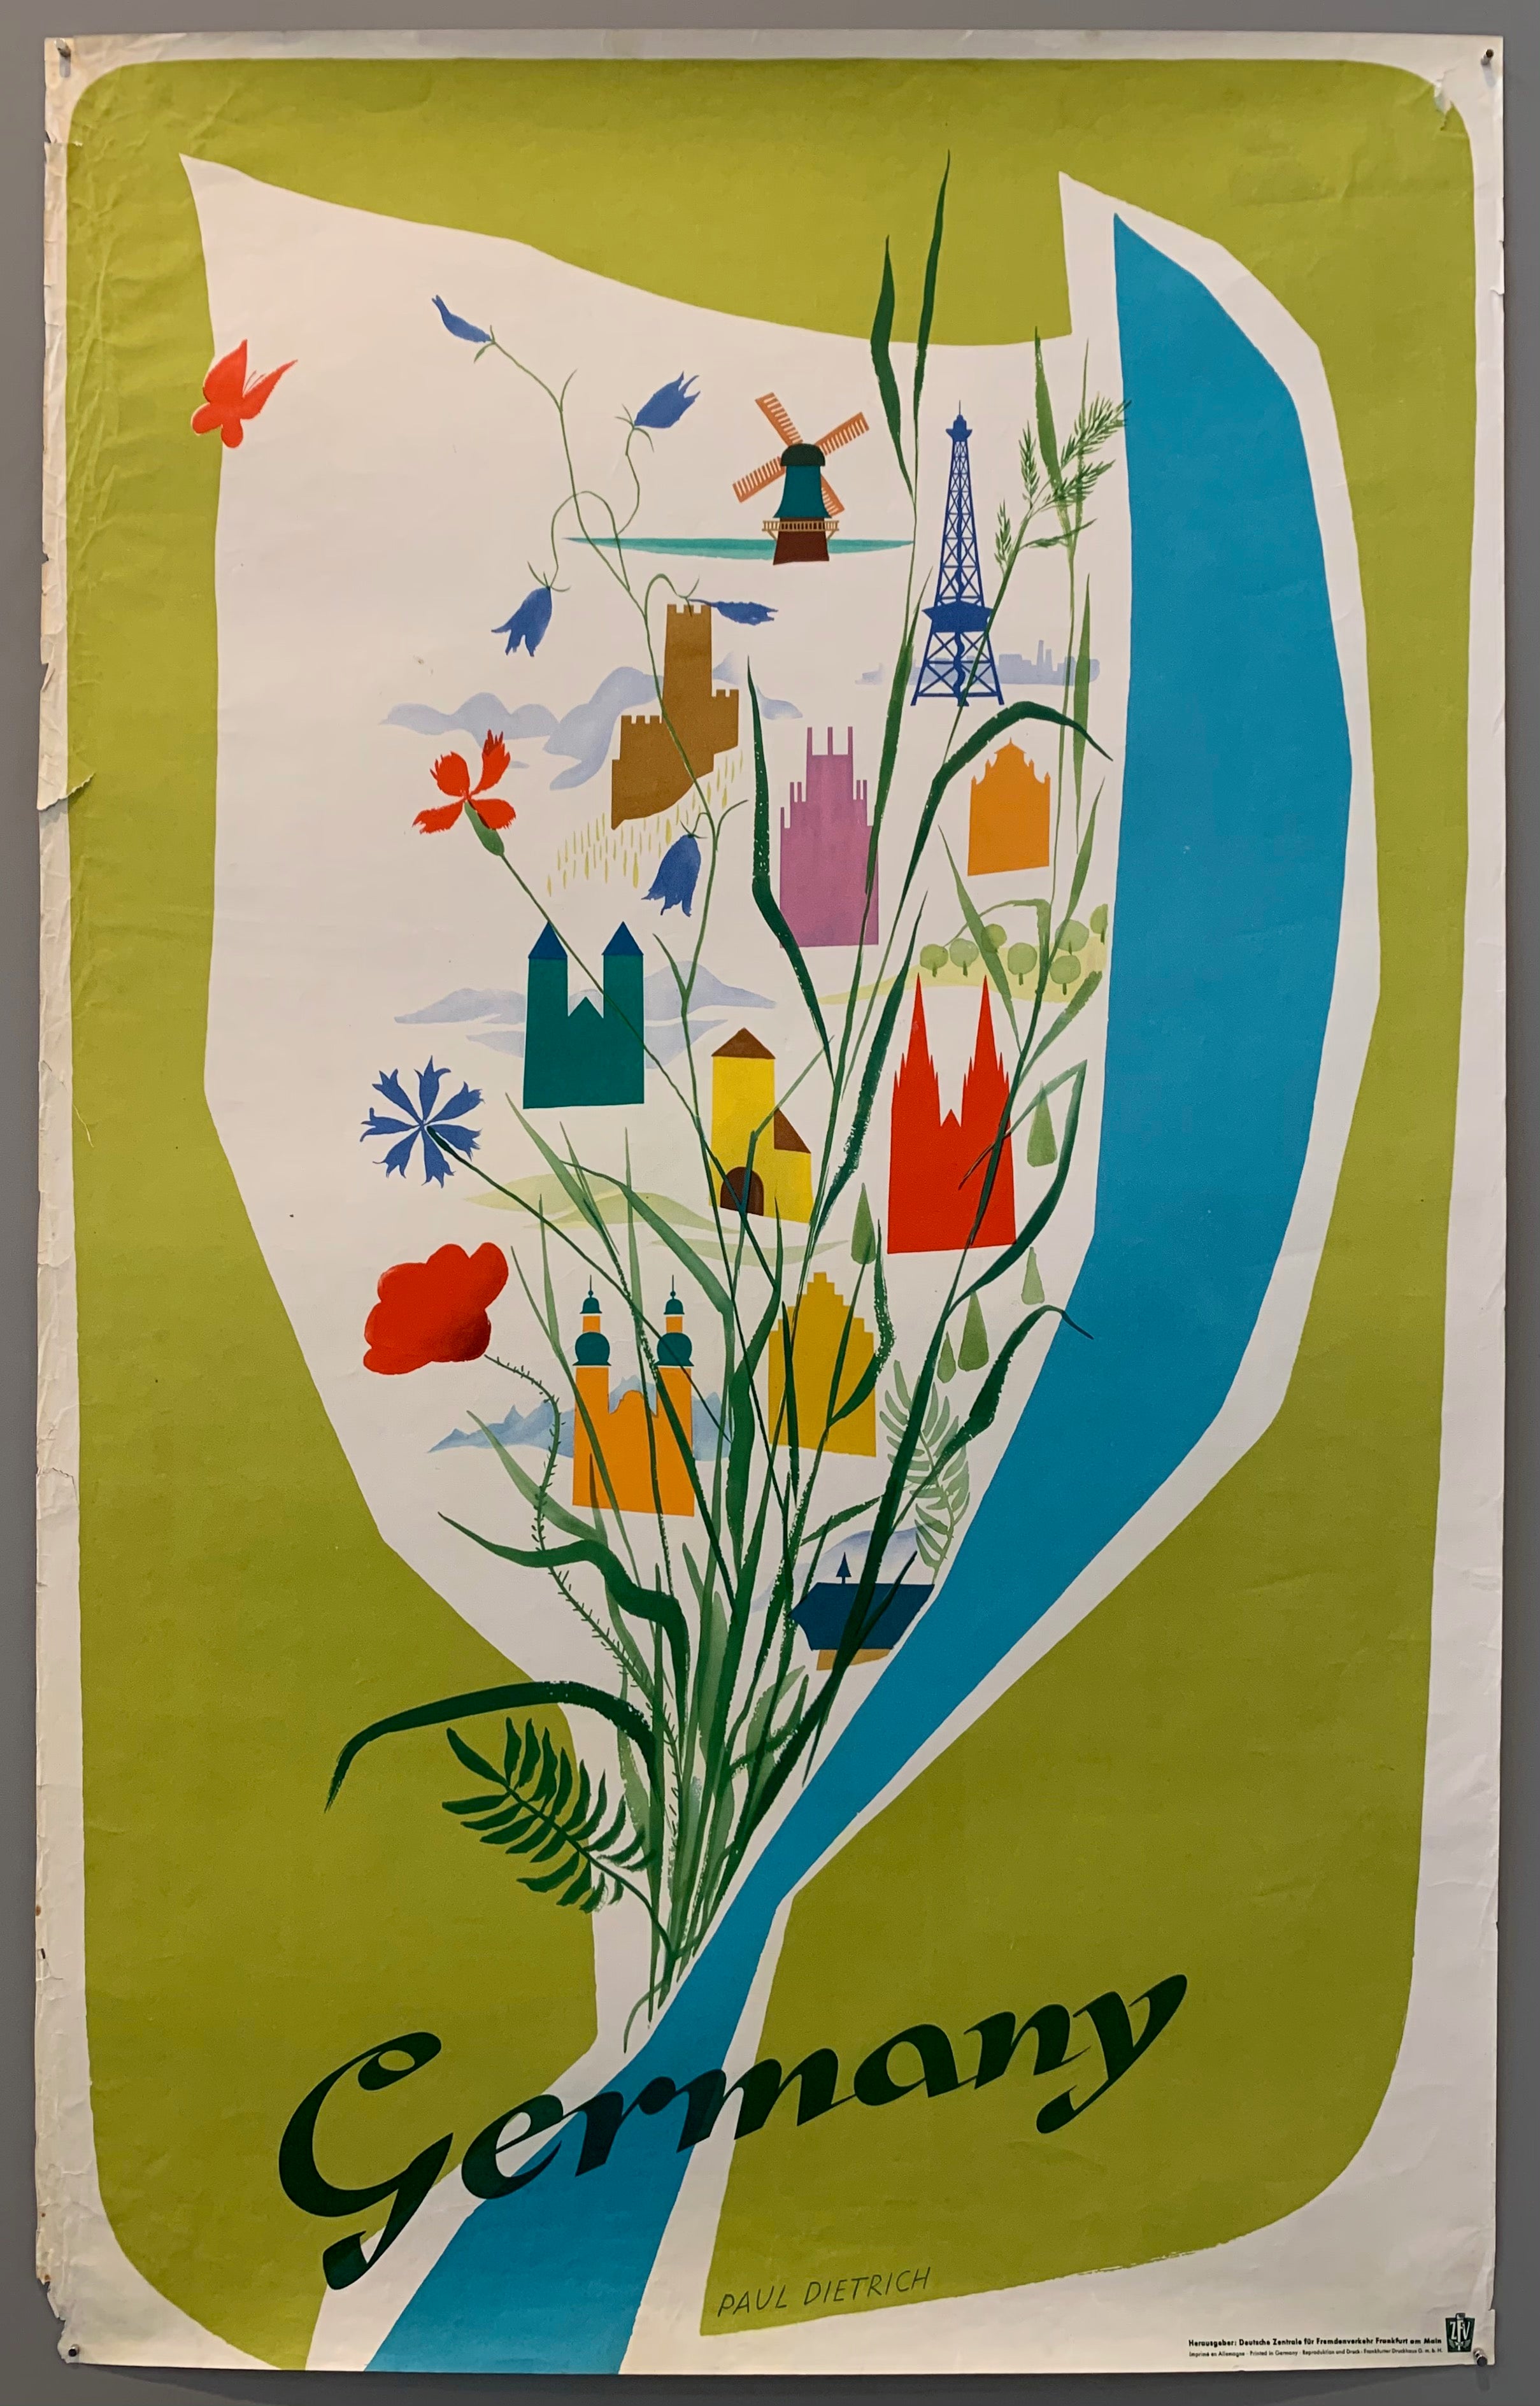 German travel poster printed in Germany. Poster shows a large bouquet made up of some green leaves and flowers and various German structures. Artist Paul DIetrich made many posters in a similar style advertising various places in Germany.